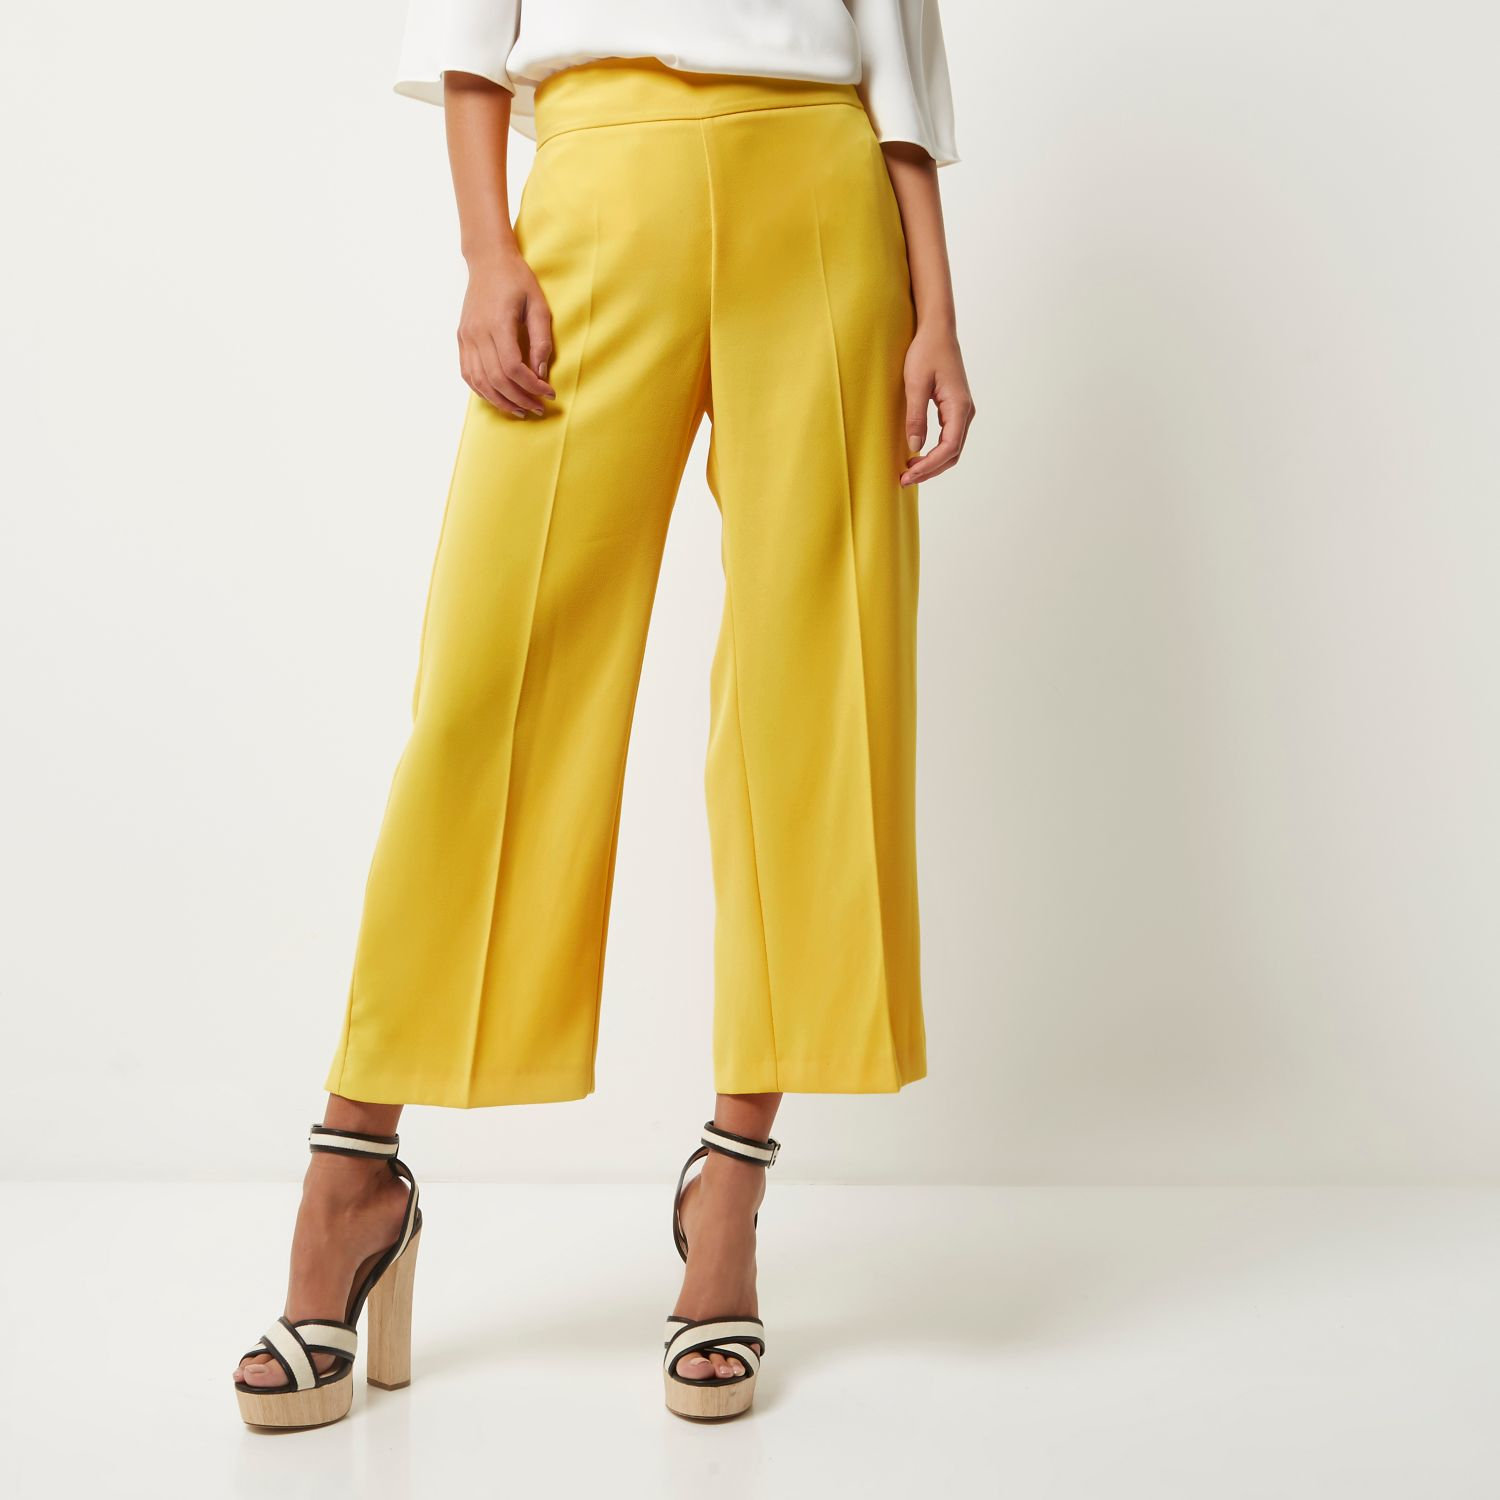 River Island Synthetic Yellow Cropped Wide Leg Pants - Lyst